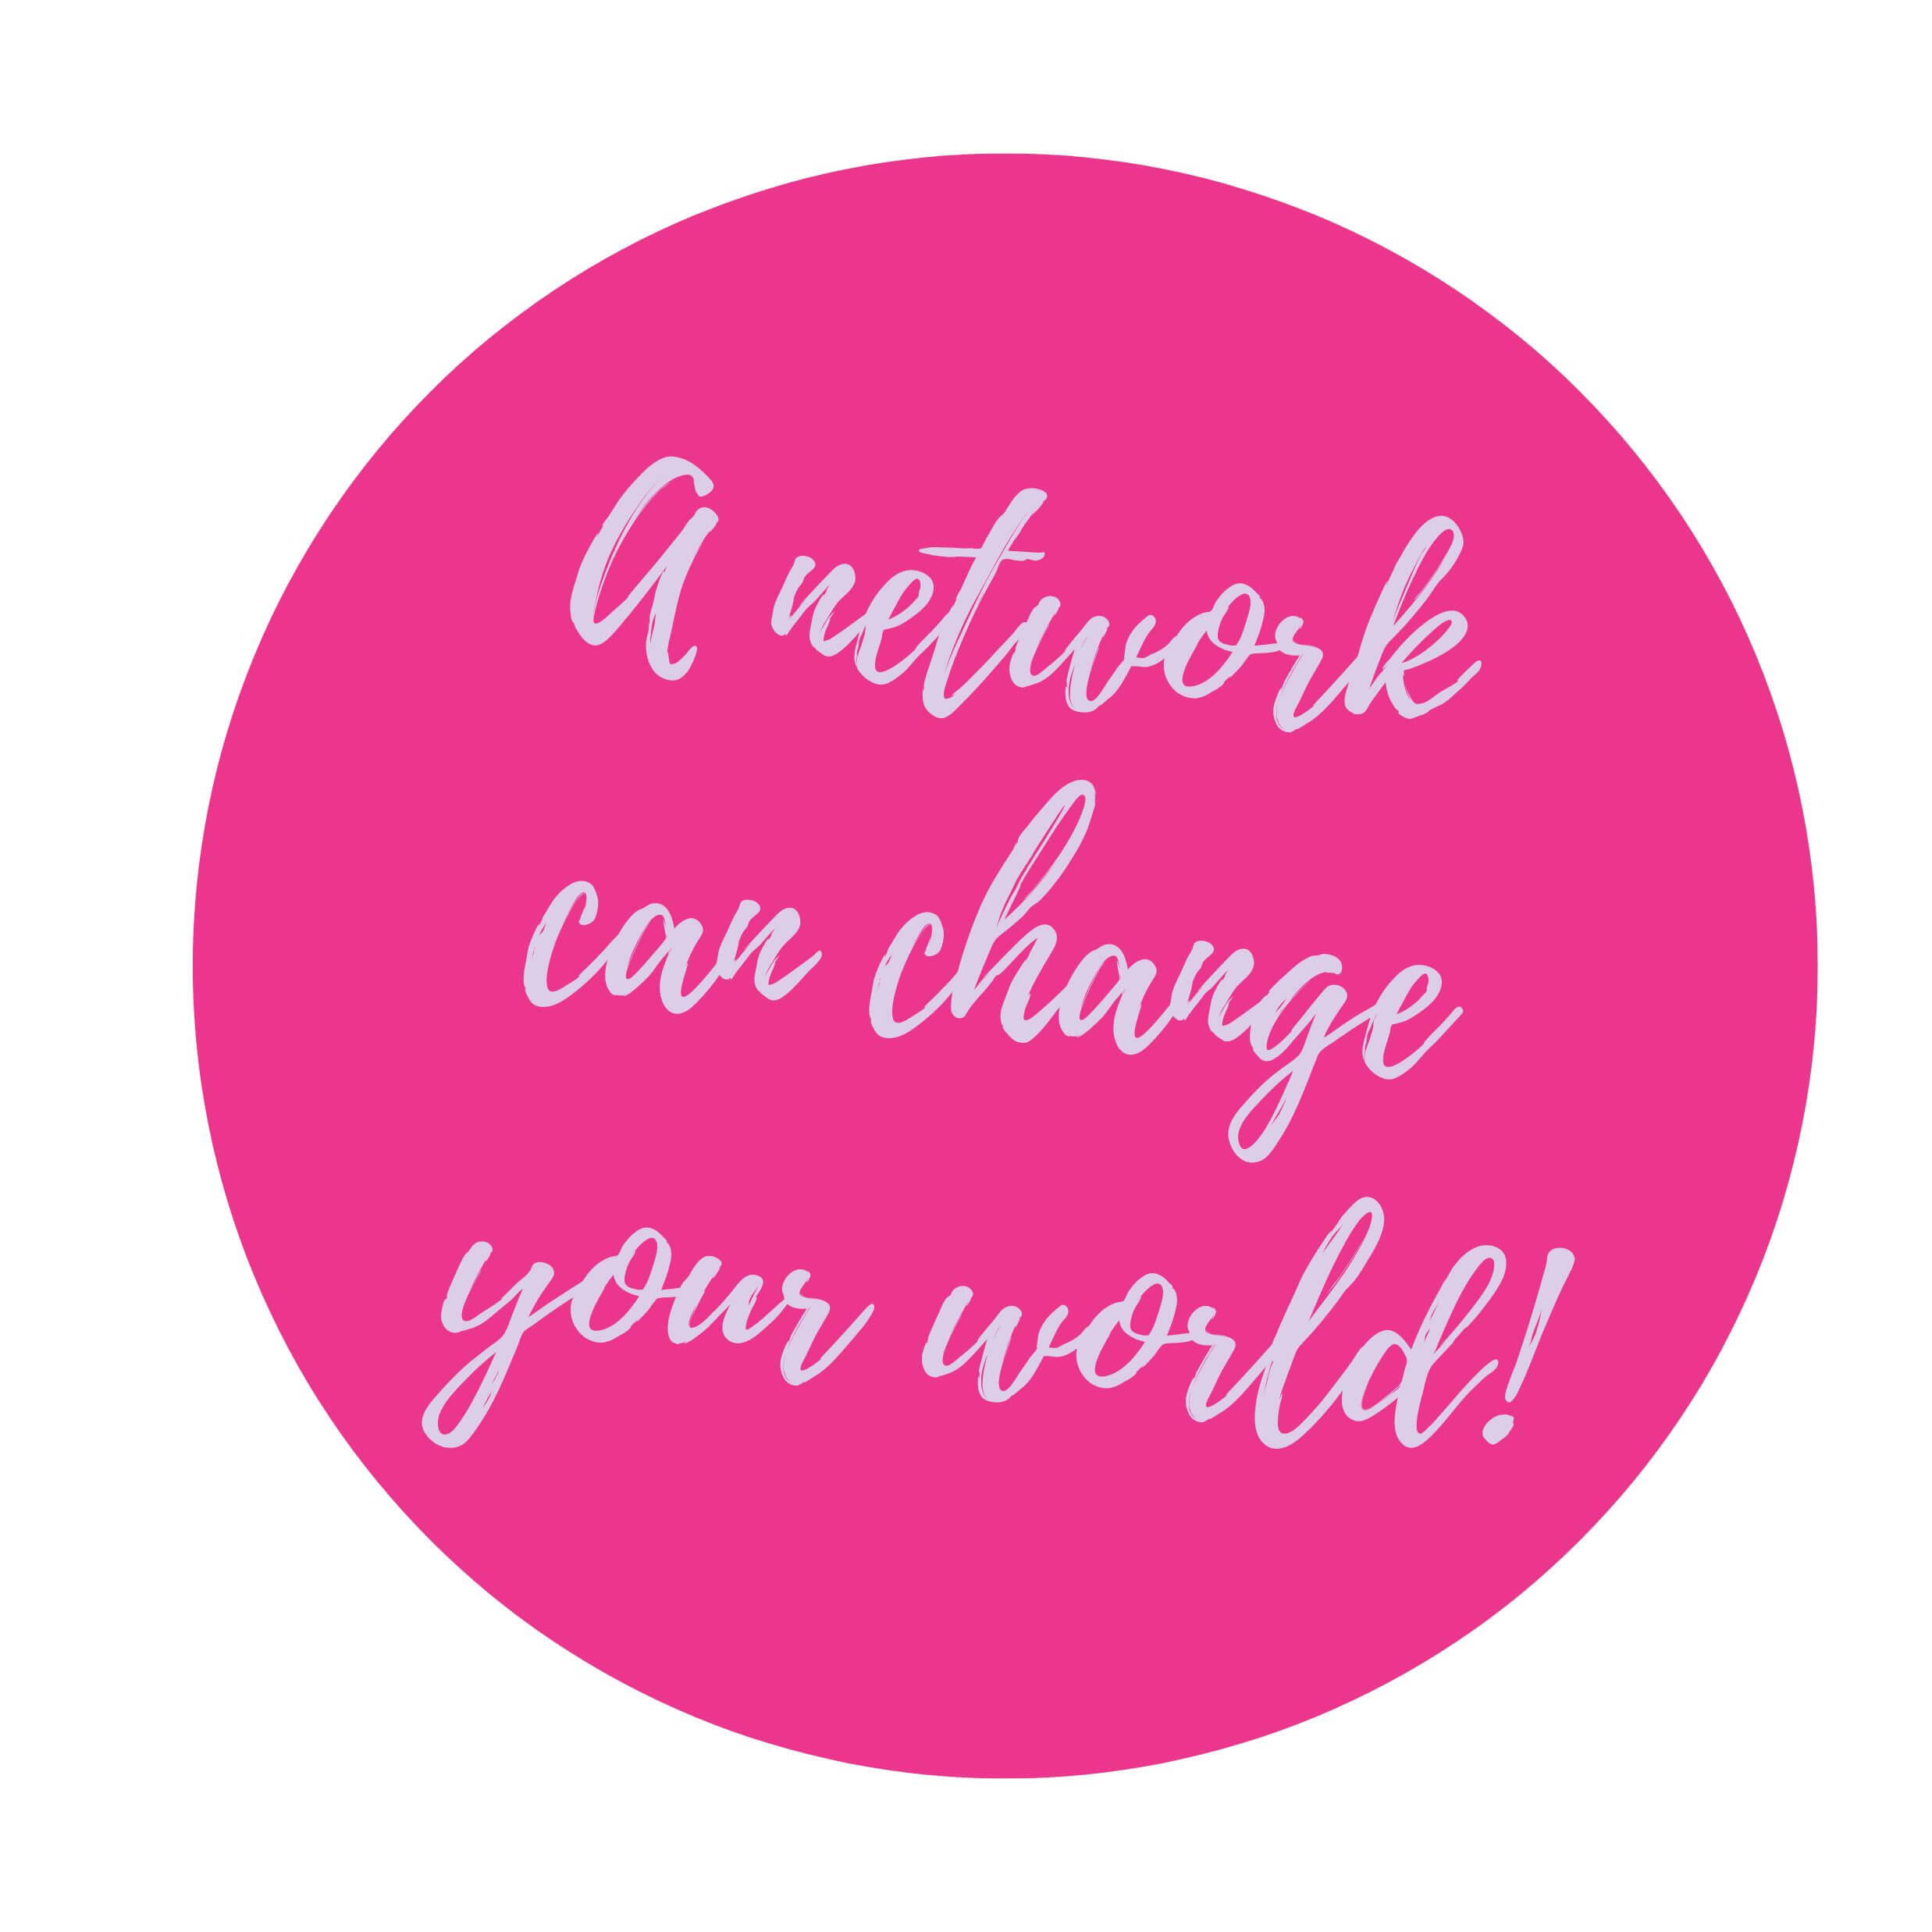 A network can change your world!